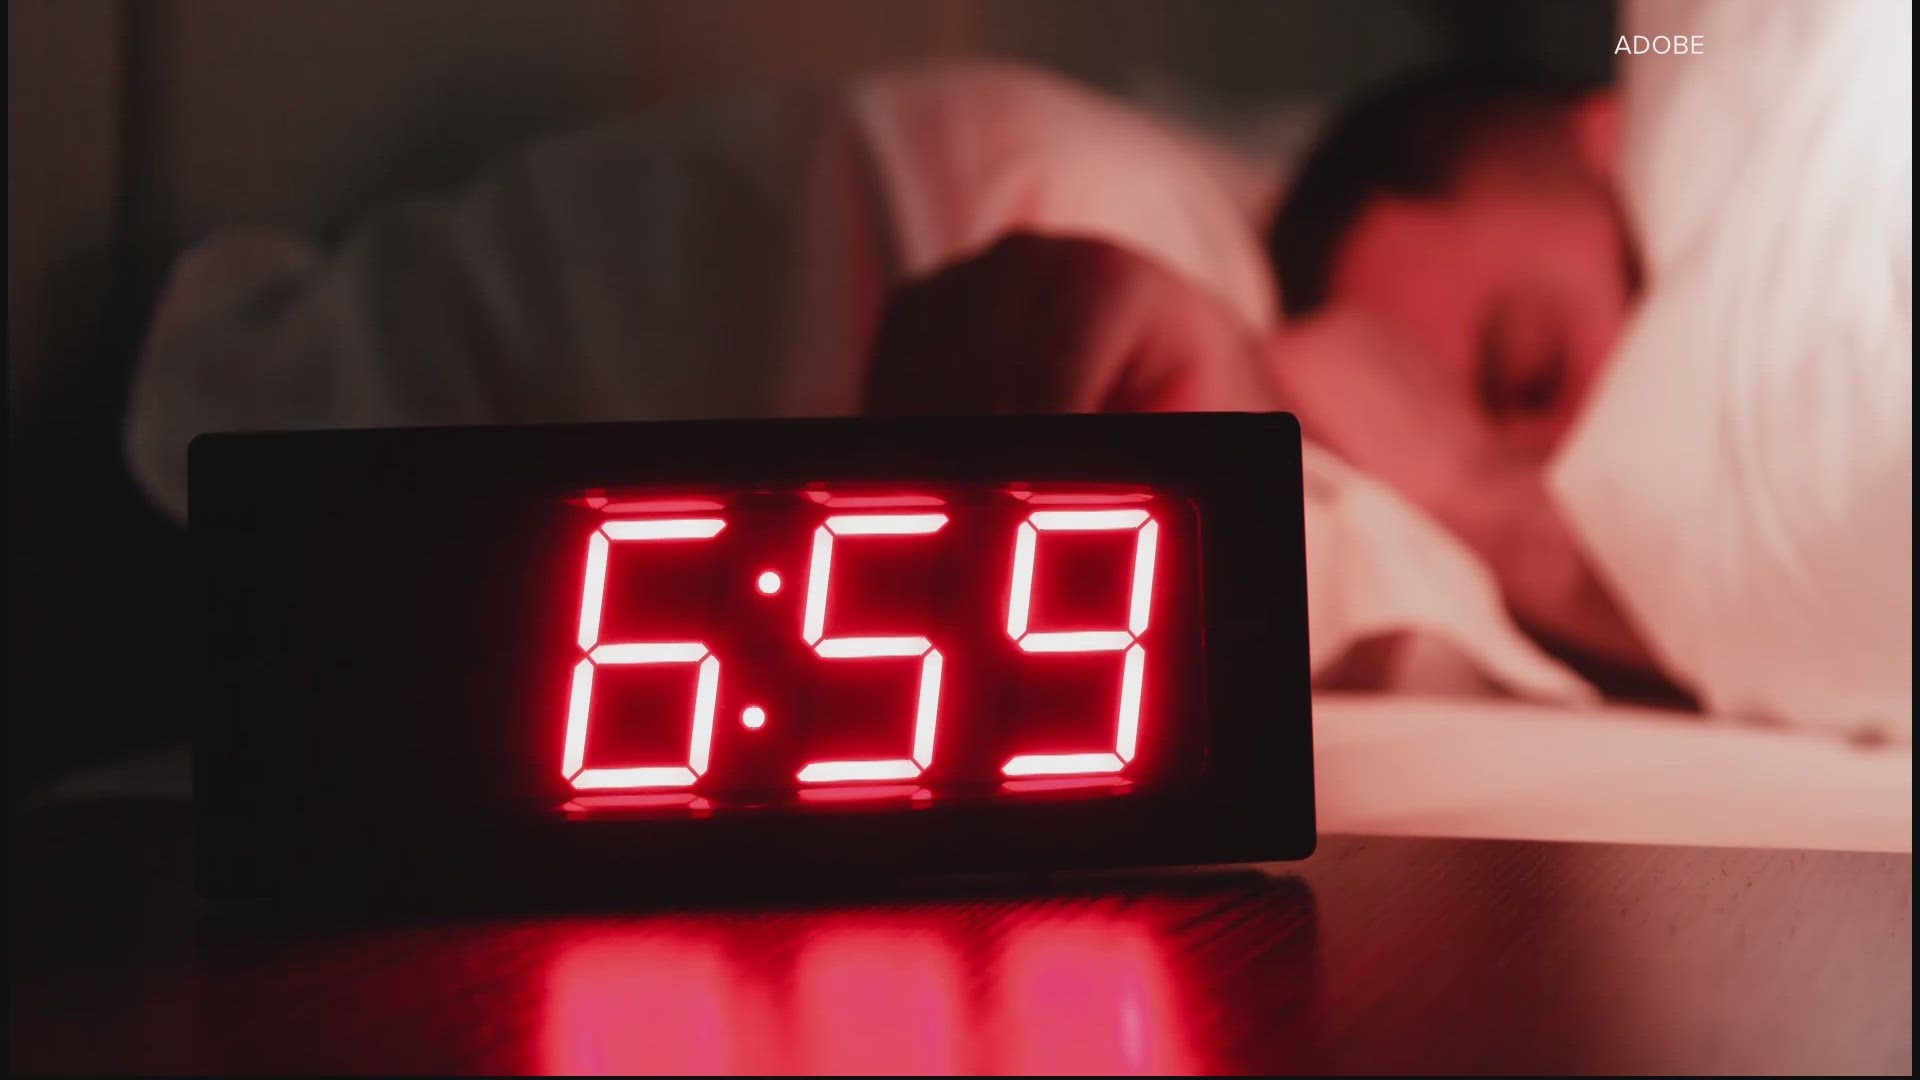 They're the questions that keep us up at night wondering about how our sleep impacts our days. 
We turned to the sources here on screen to verify.